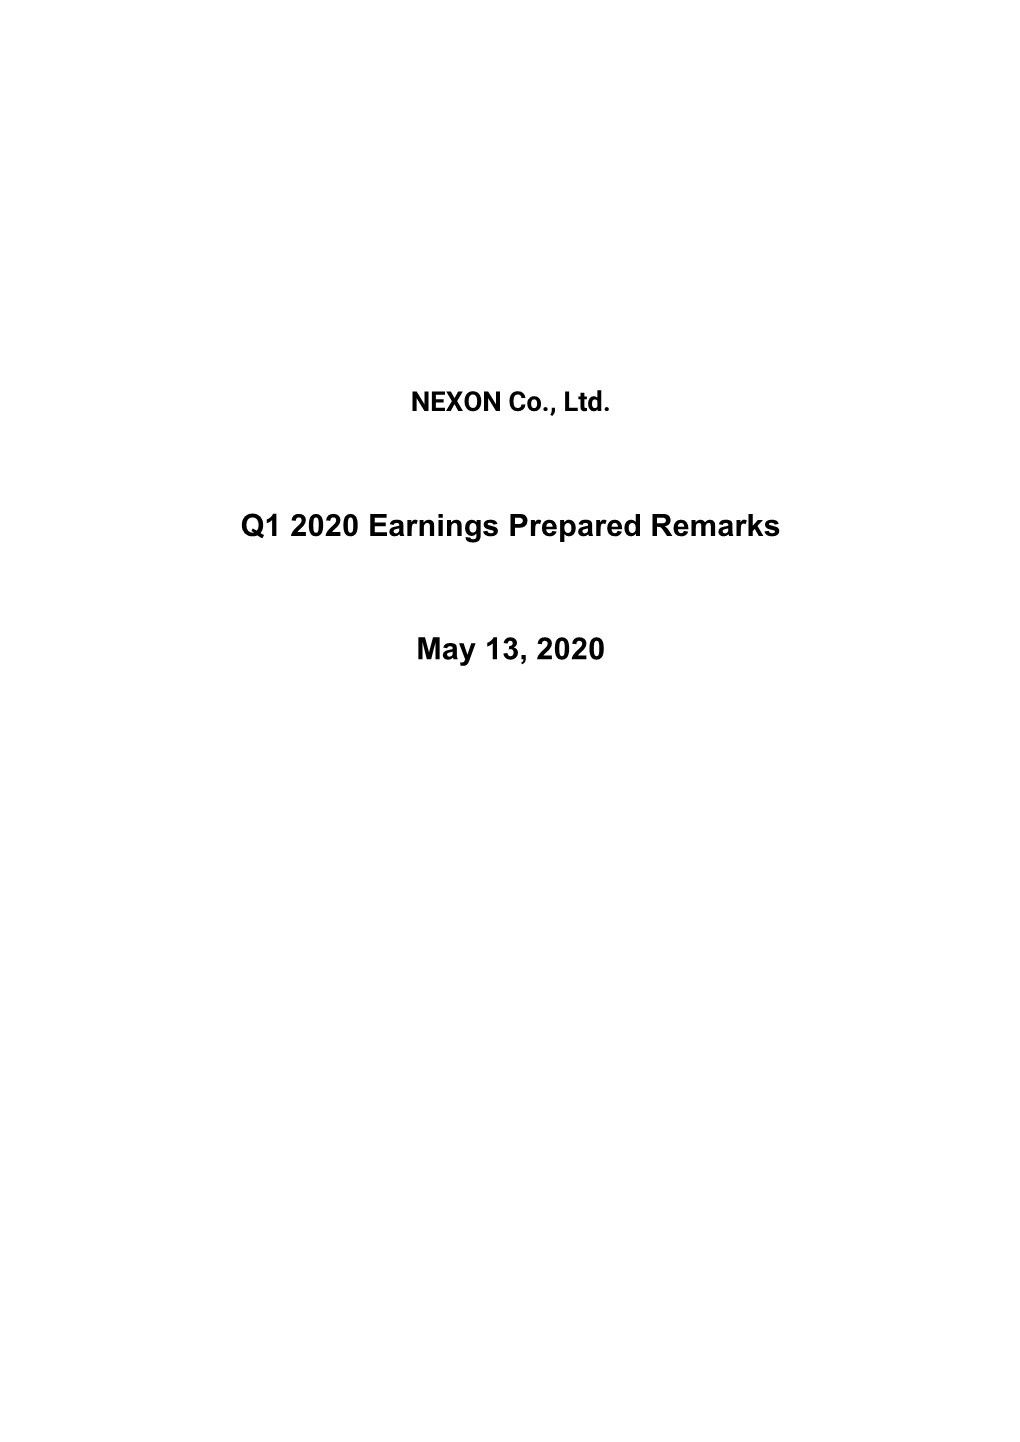 Q1 2020 Earnings Prepared Remarks May 13, 2020